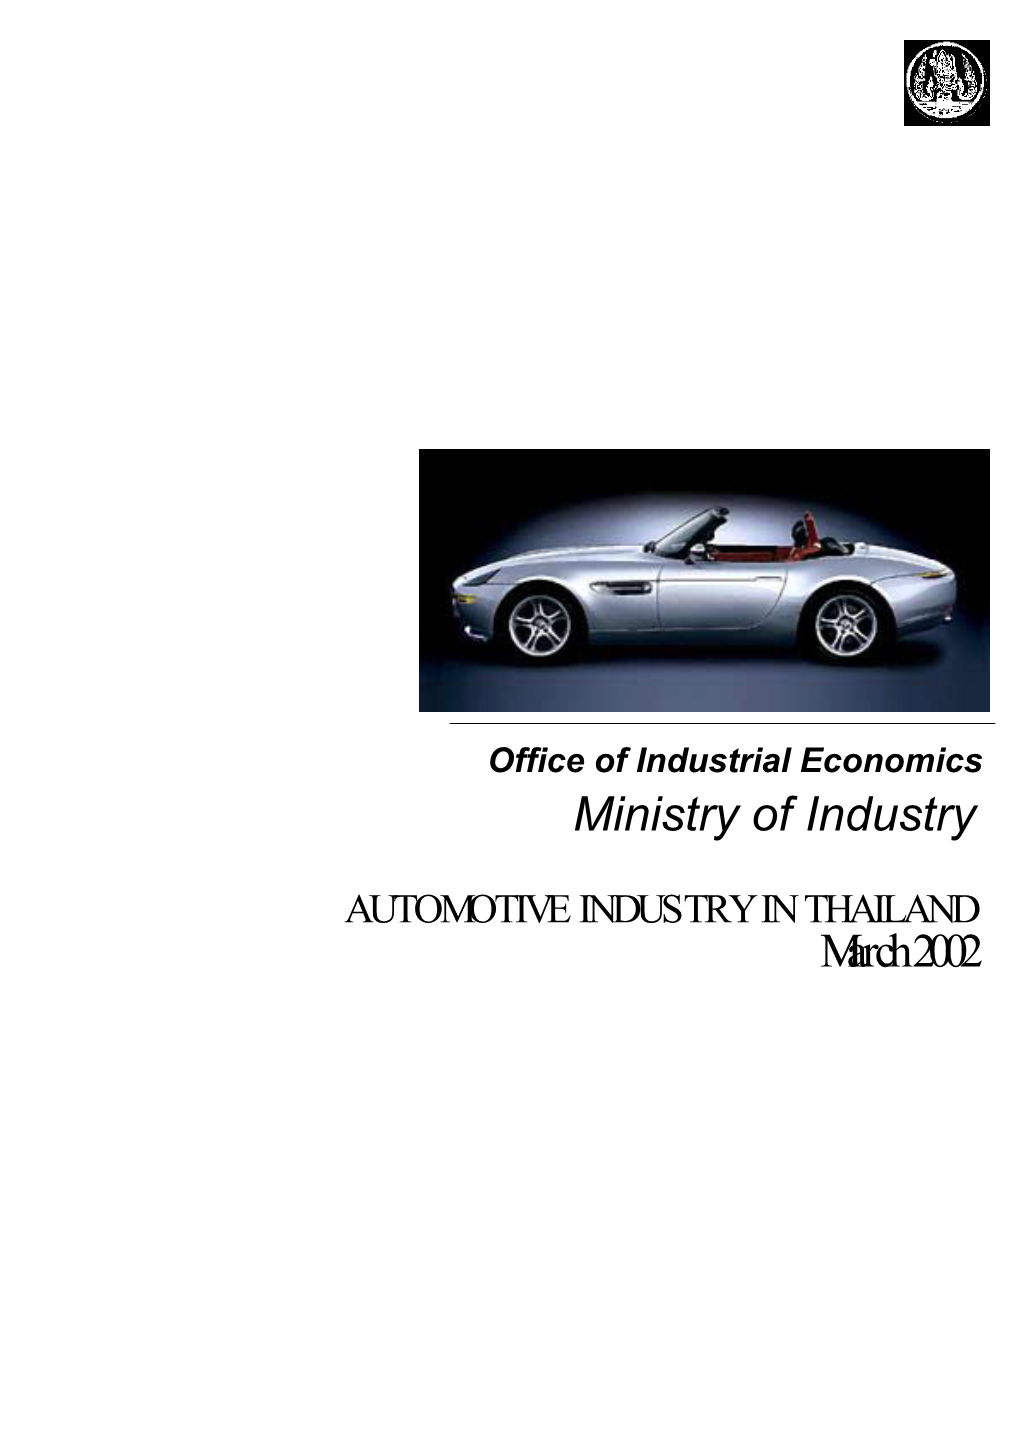 AUTOMOTIVE INDUSTRY in THAILAND March 2002 TABLE of CONTENT